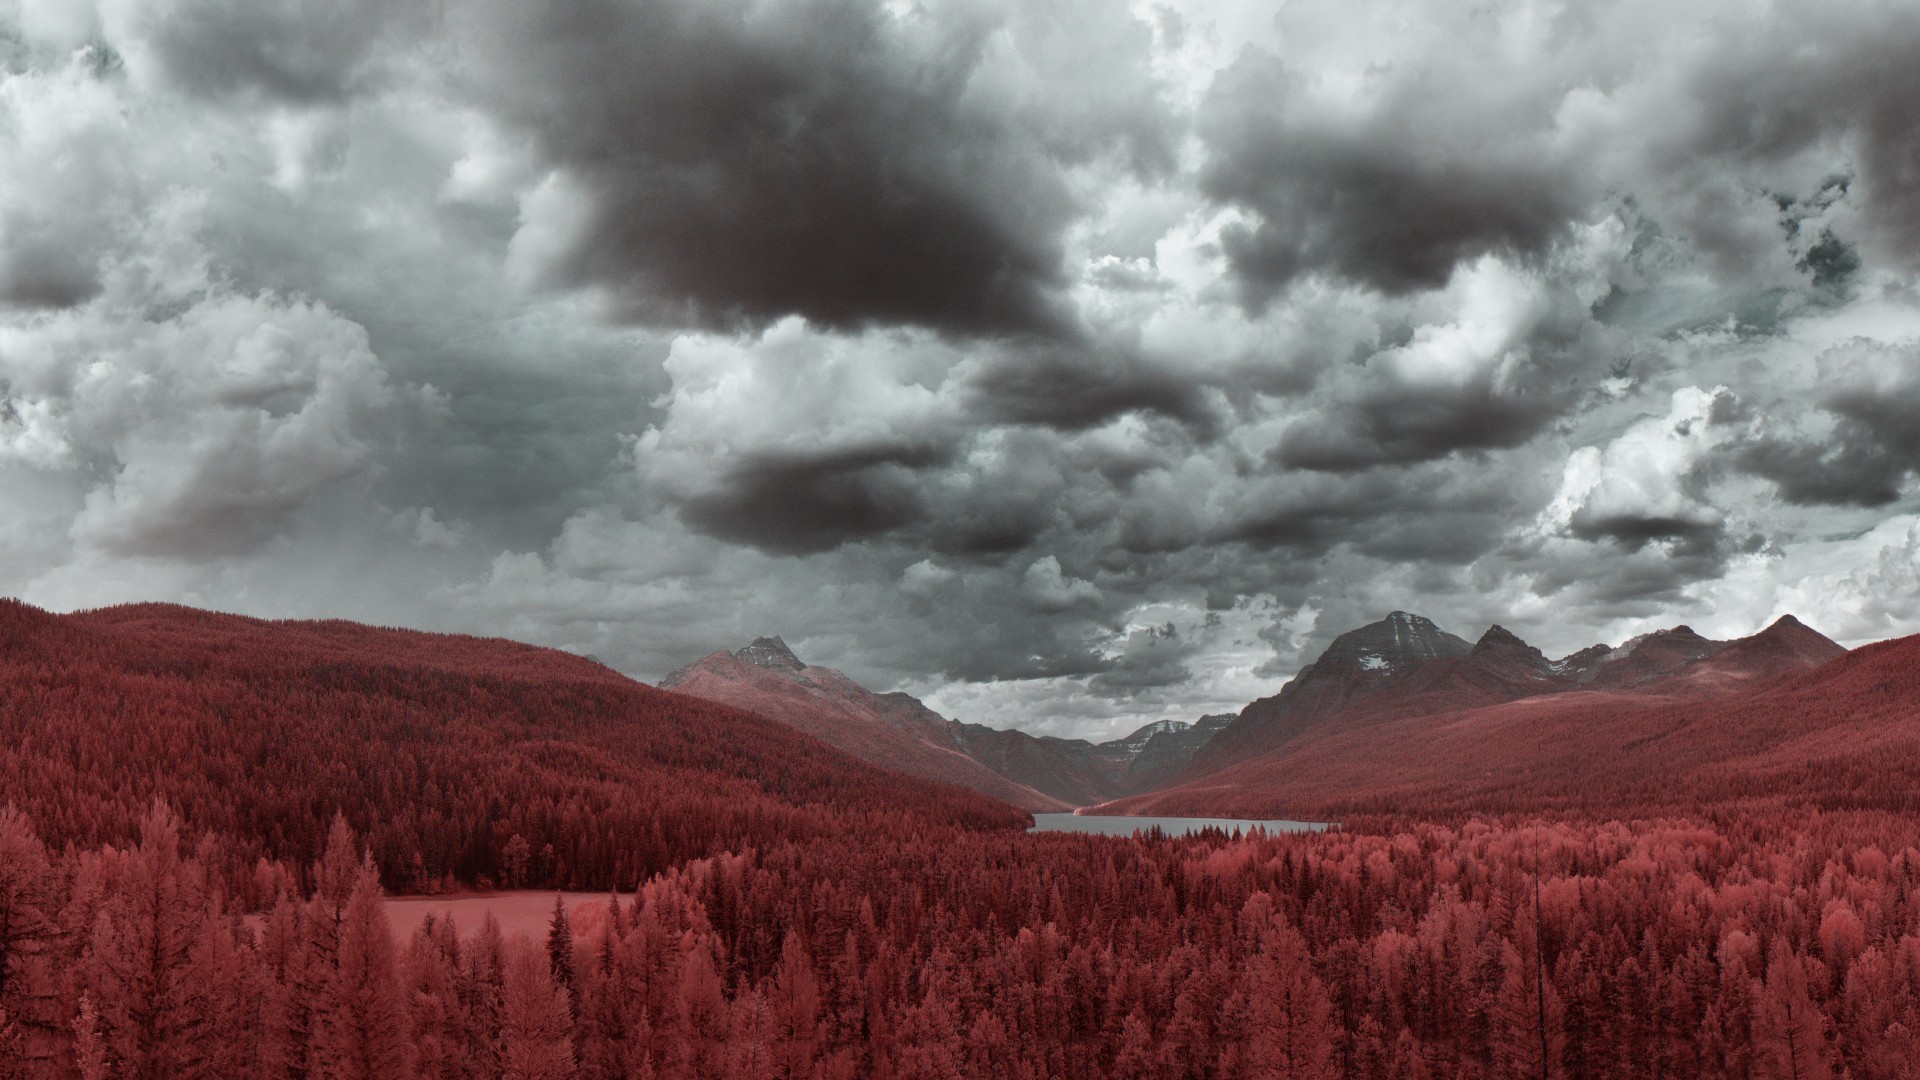 General 1920x1080 nature landscape overcast clouds sky trees mountains